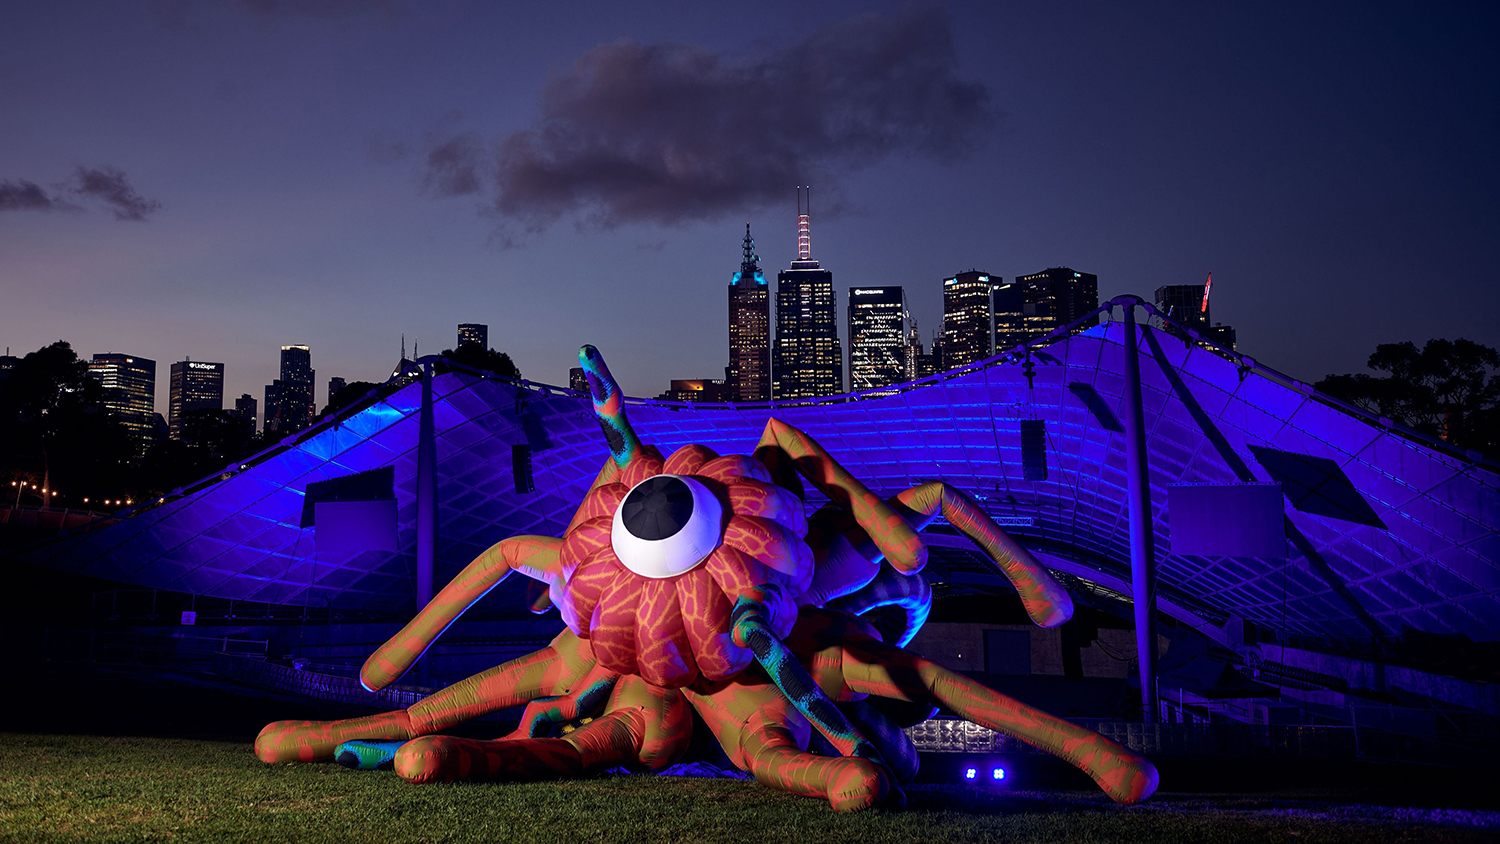 Image shows illuminated octopus in front of Melbourne city buildings at night time  